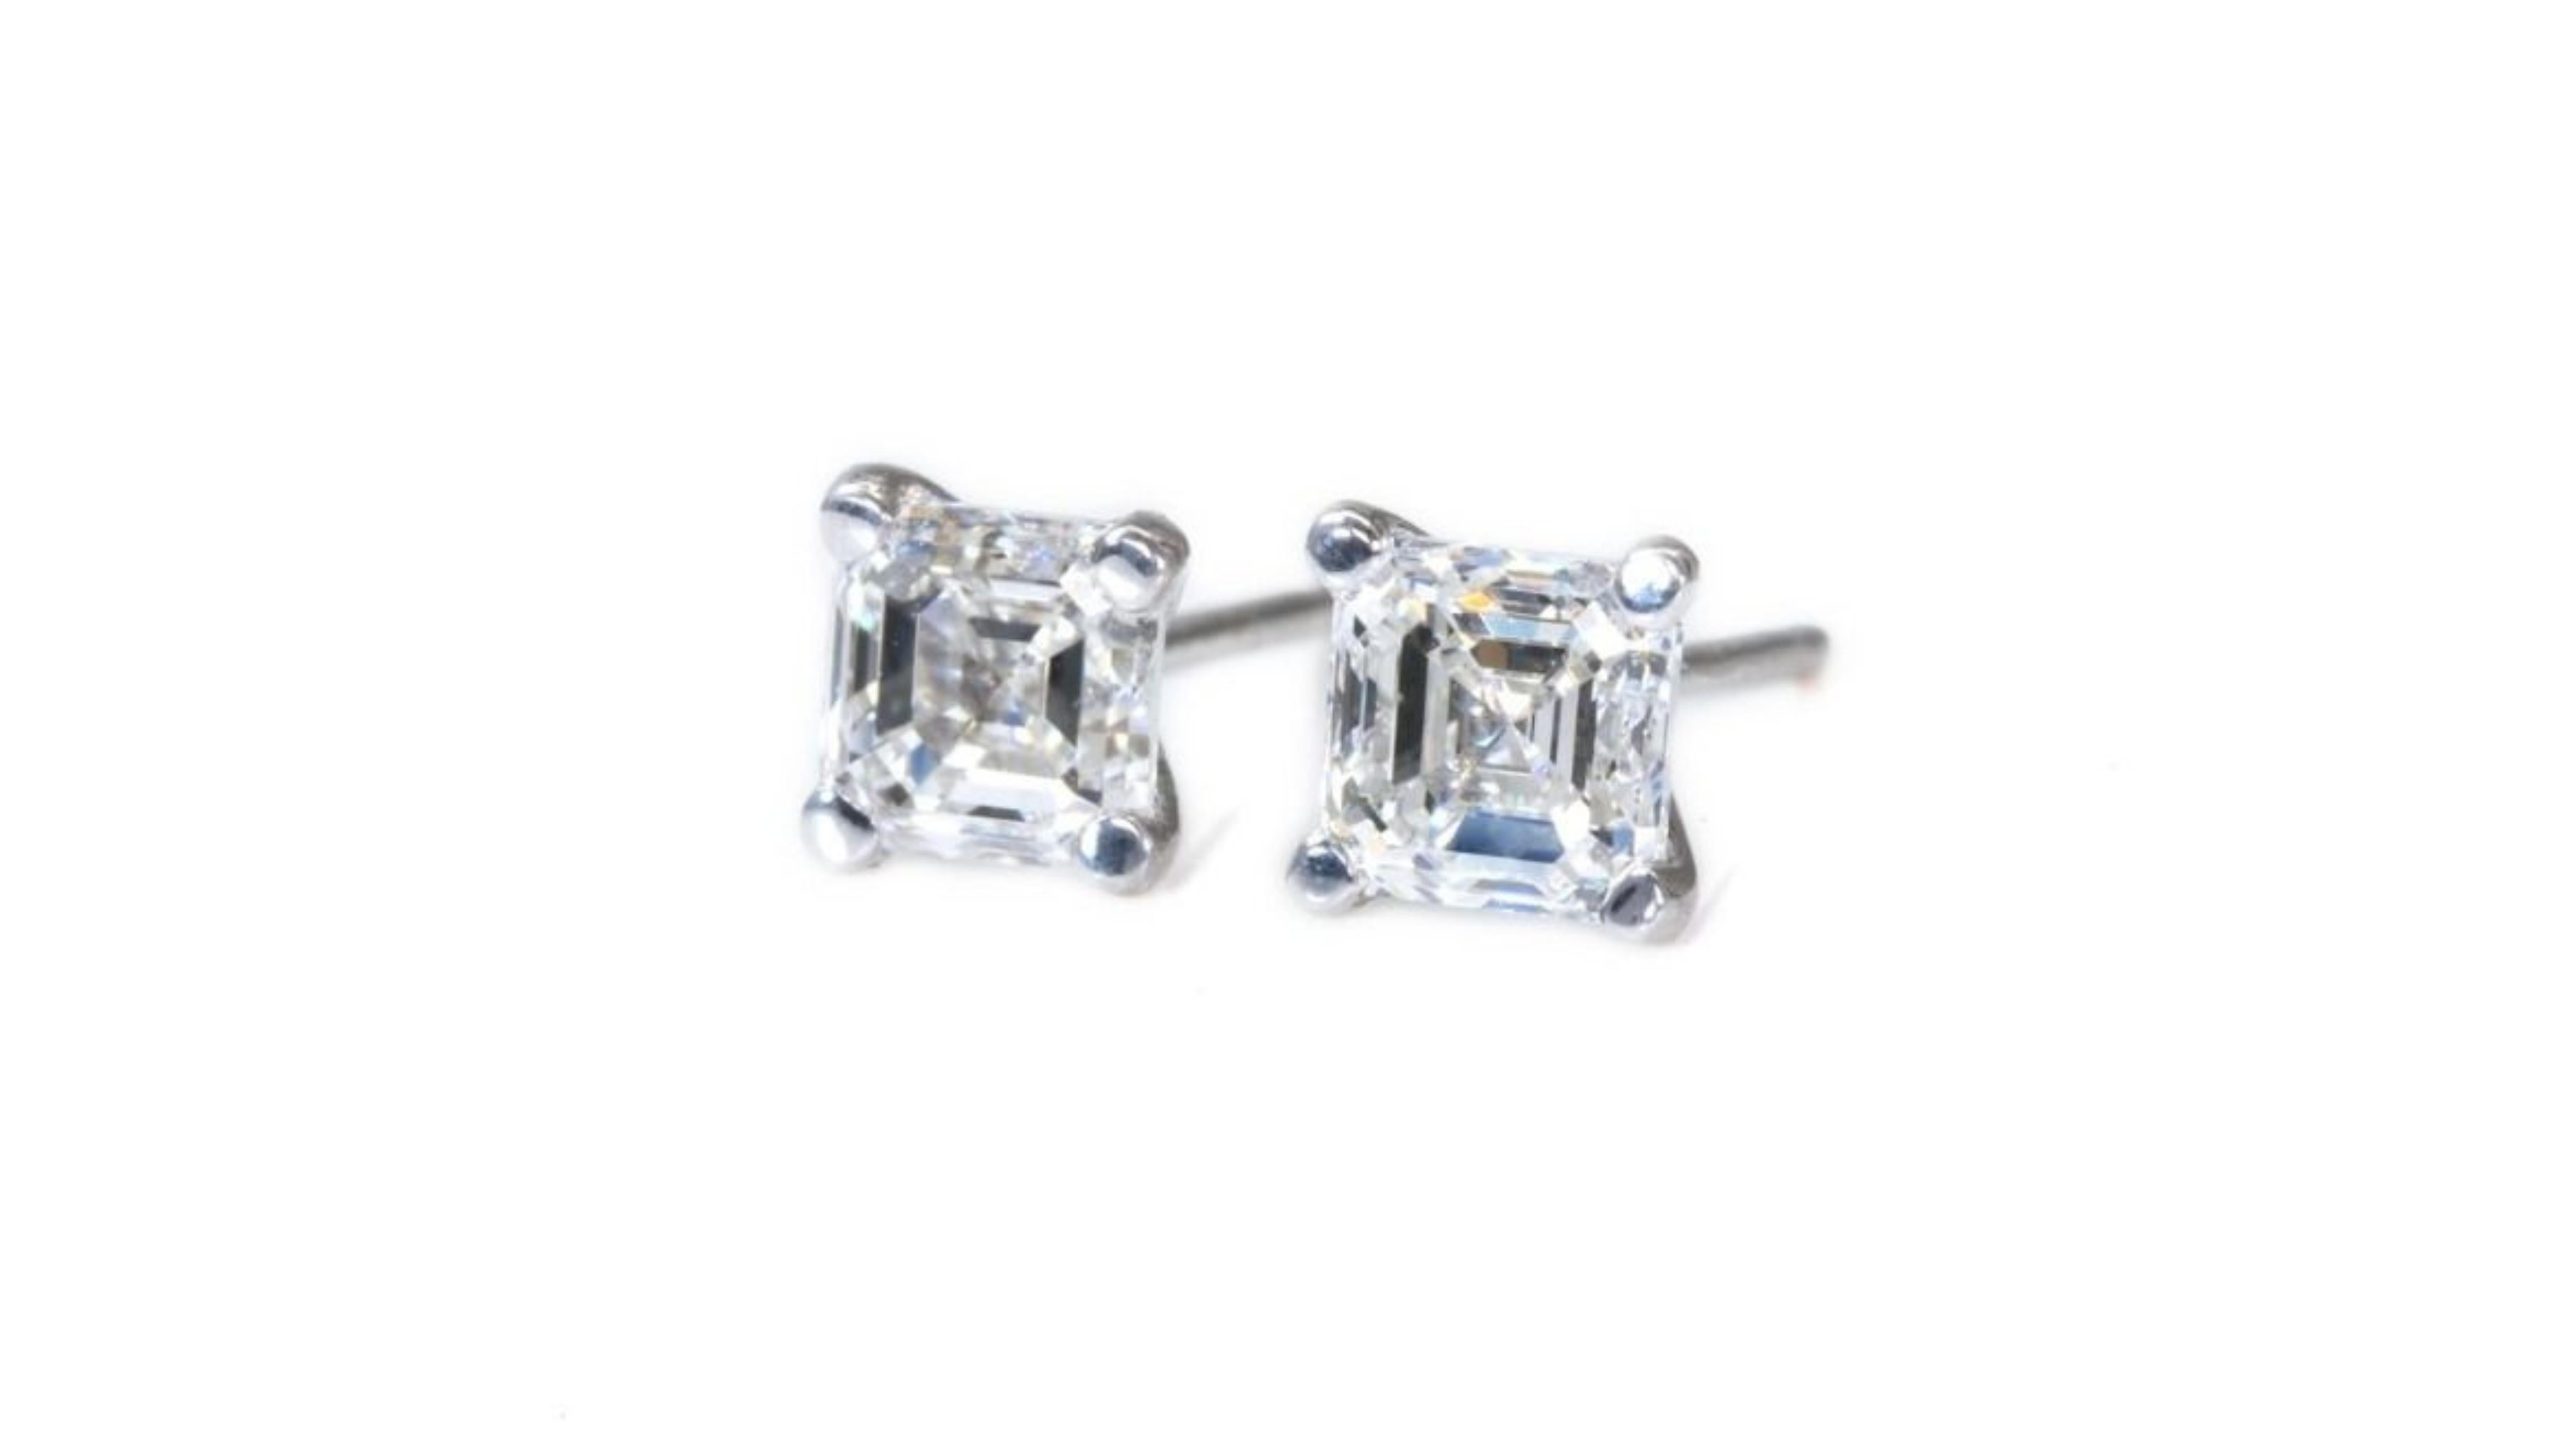 Classic 18k  White Gold Stud Earrings with 1.41 ct. Asccher Cut Natural Diamond For Sale 2